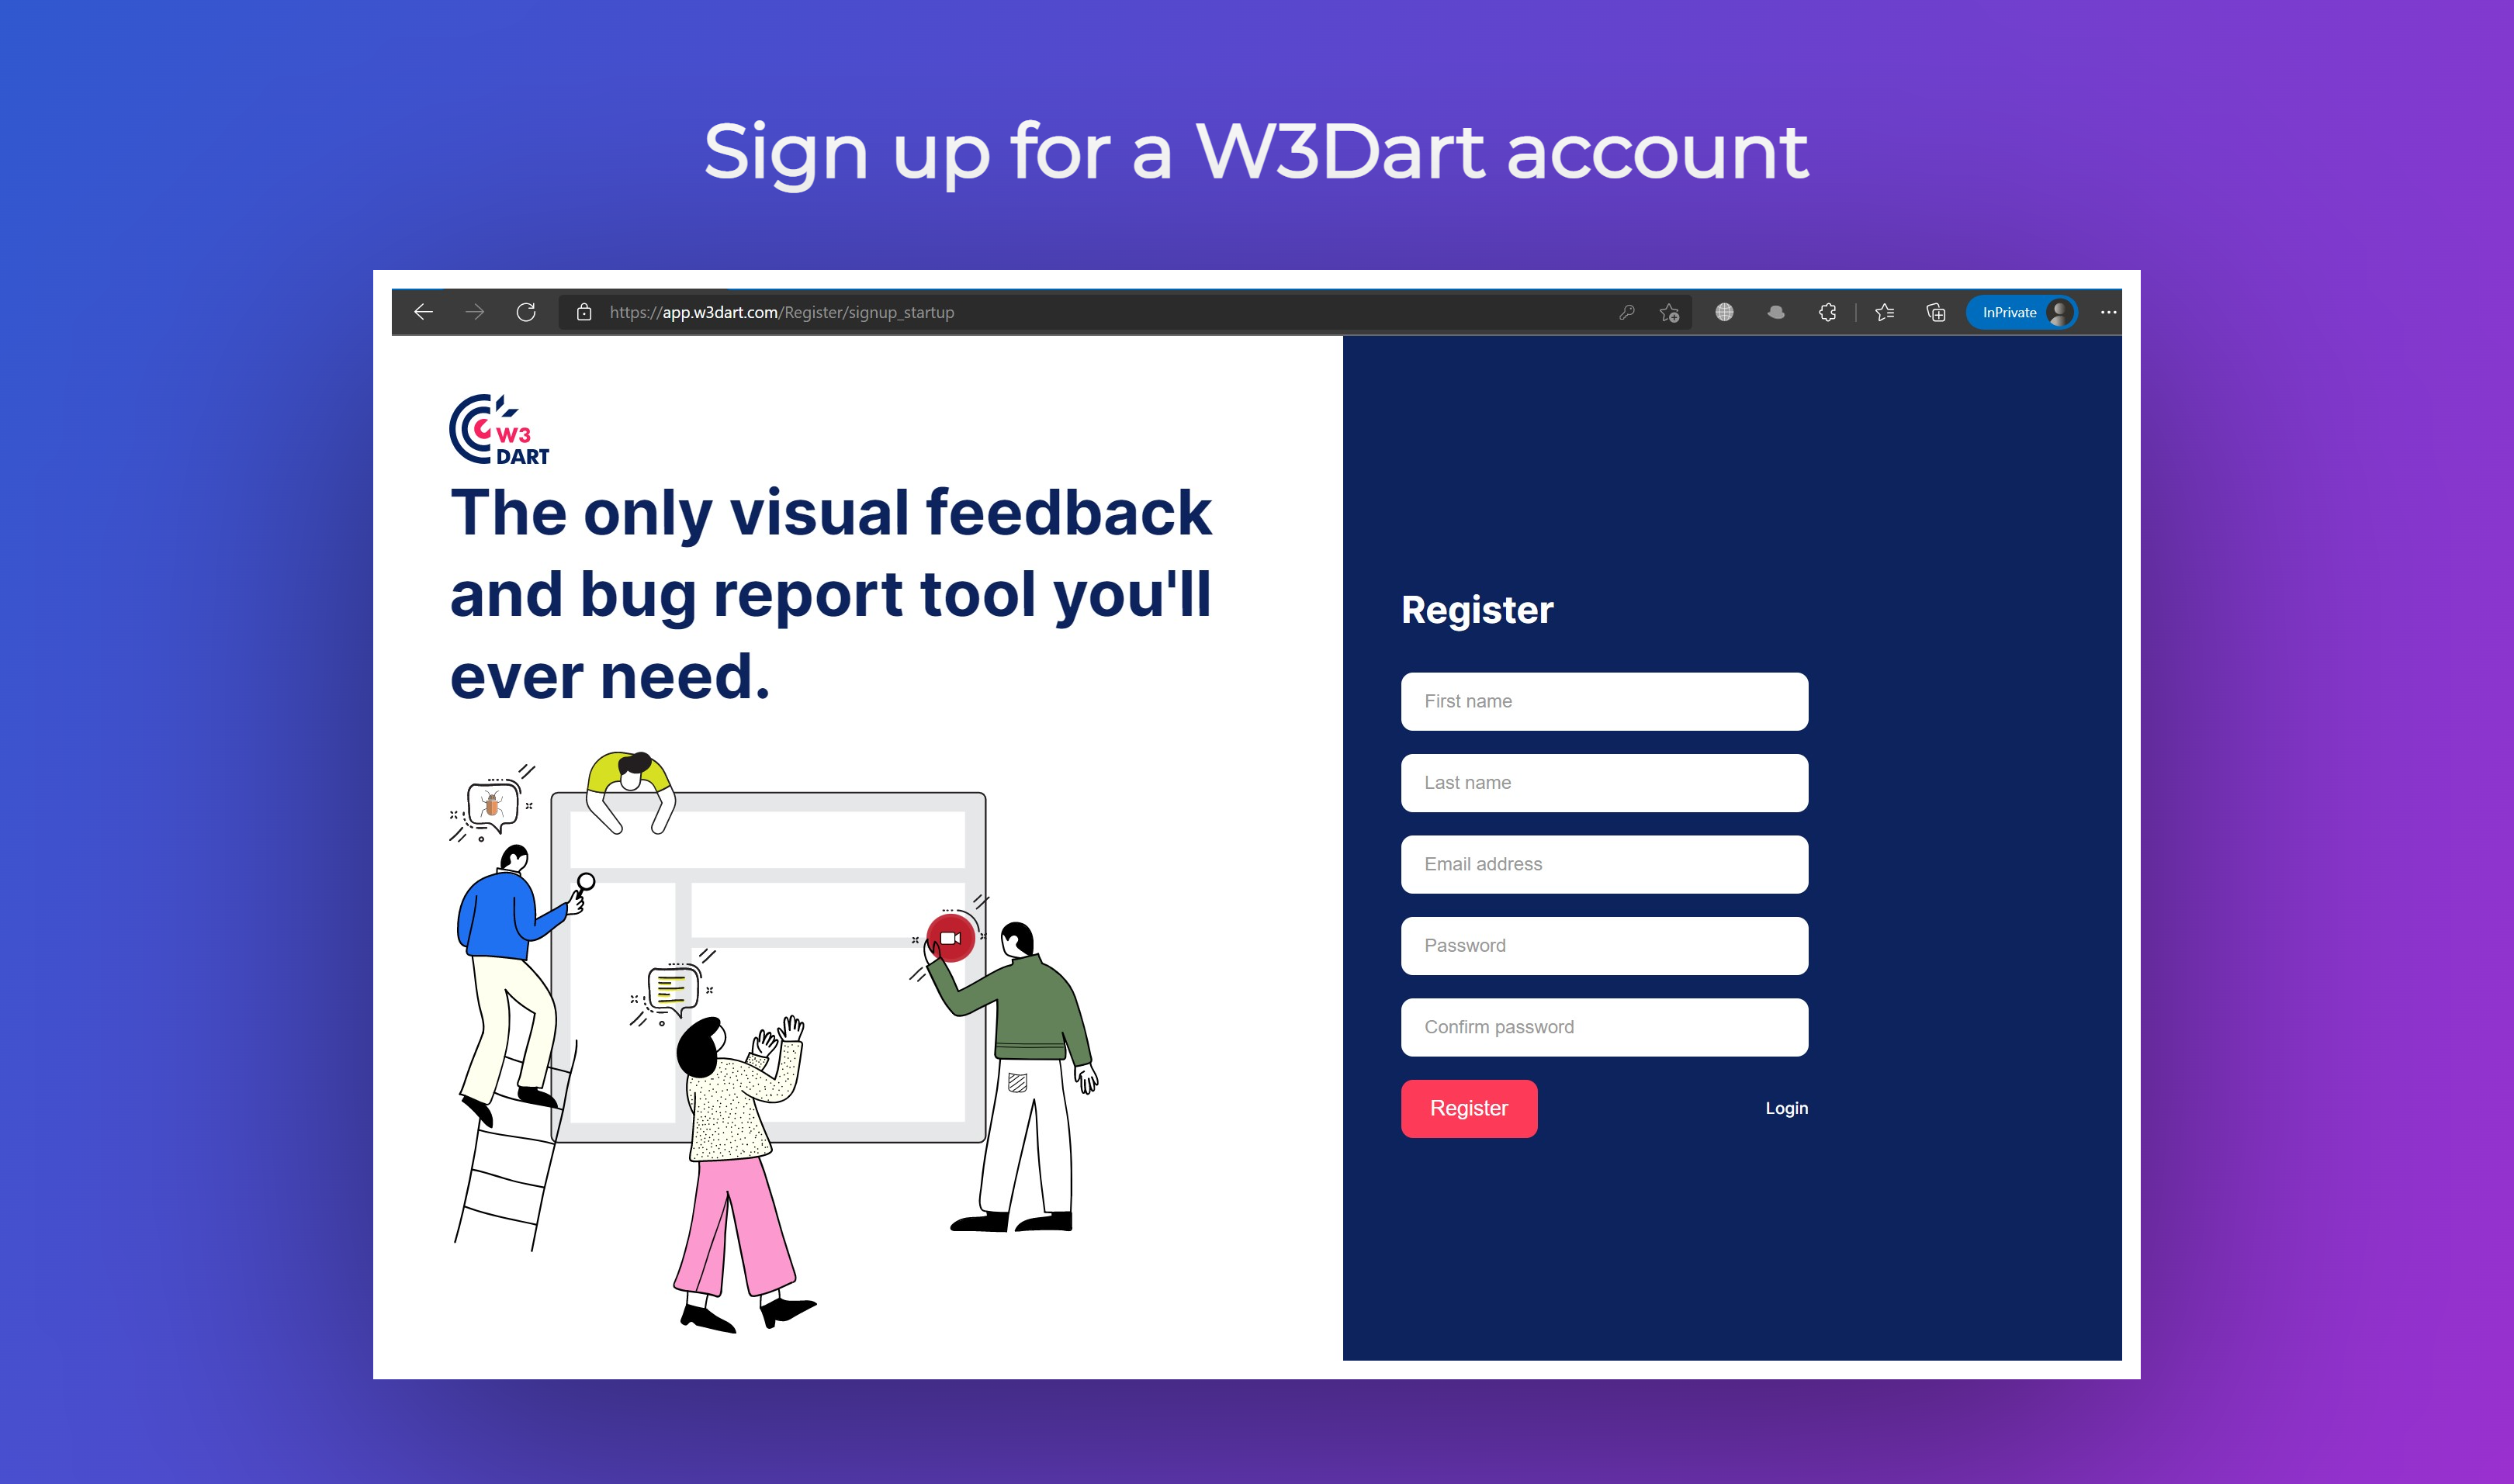 Sign up for a W3Dart account